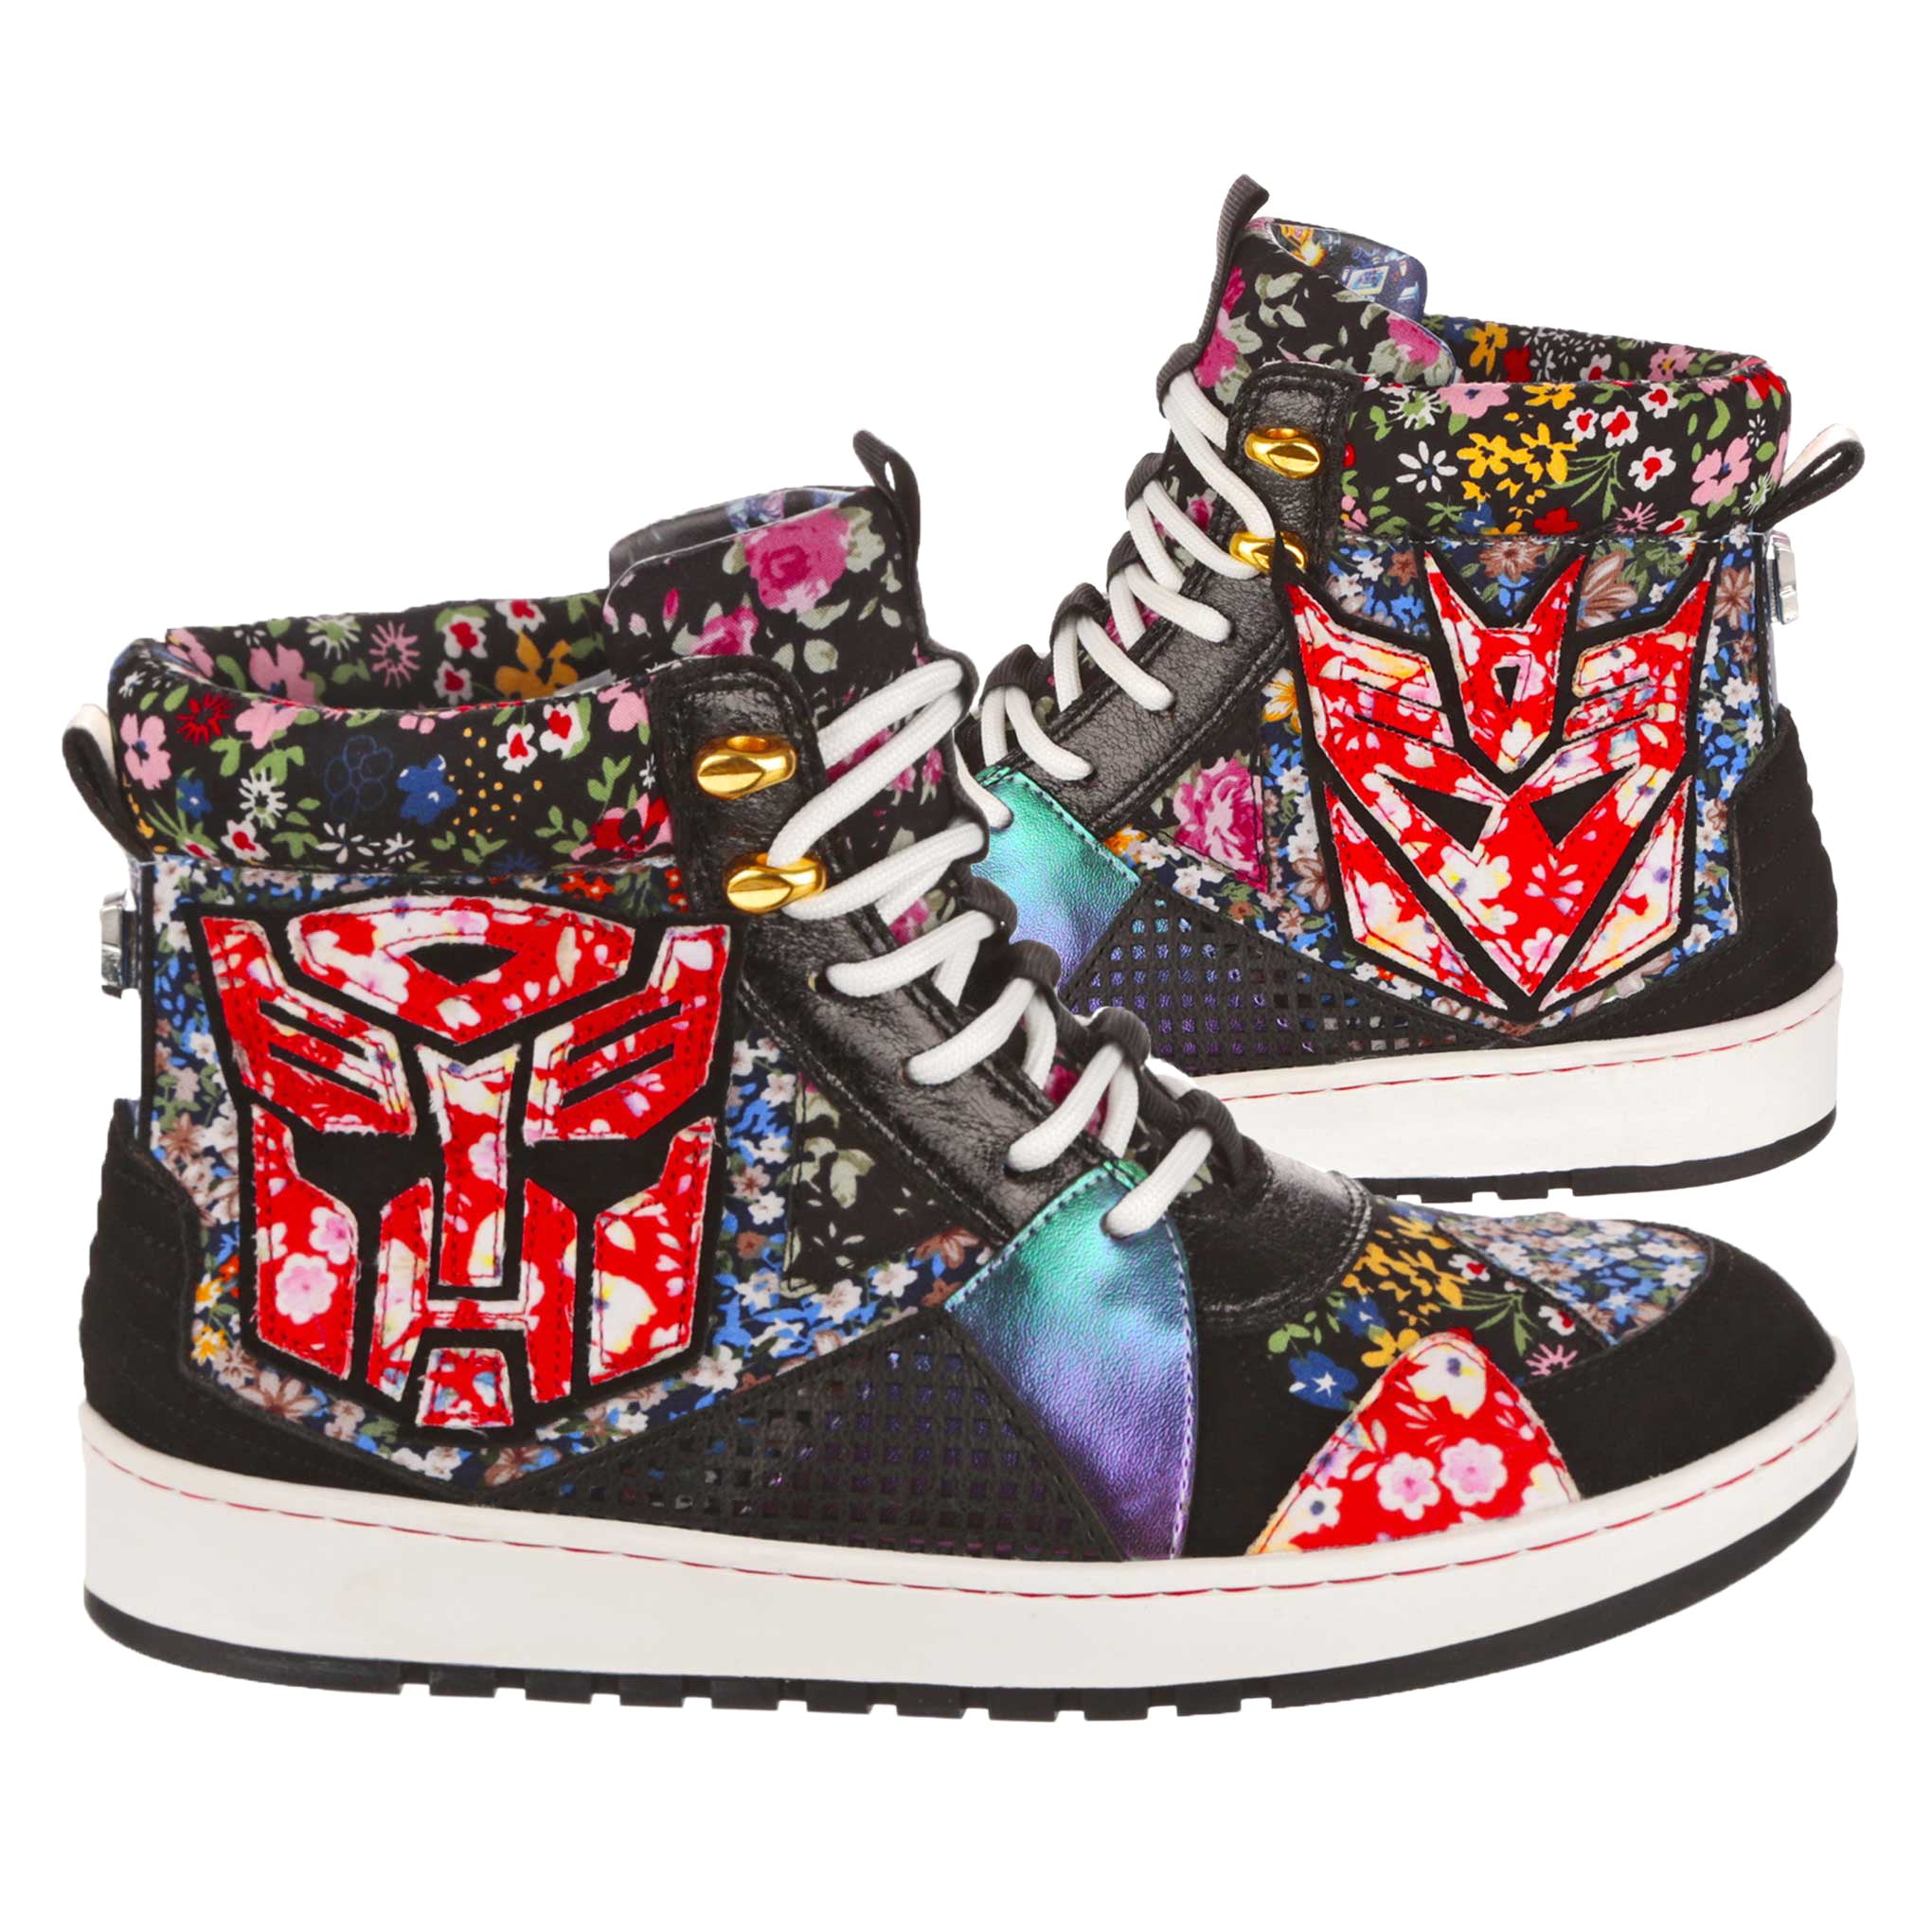 A pair of lace-up Transformers inspired high top trainers sit side by side. Multicoloured retro floral prints are mixed with red and black details as well as a red floral embroidered Decepticon and Autobot logo on each boot. A white and black chunky sole matches the white laces while a black pull up tab sits at the back of these flat trainer boots.